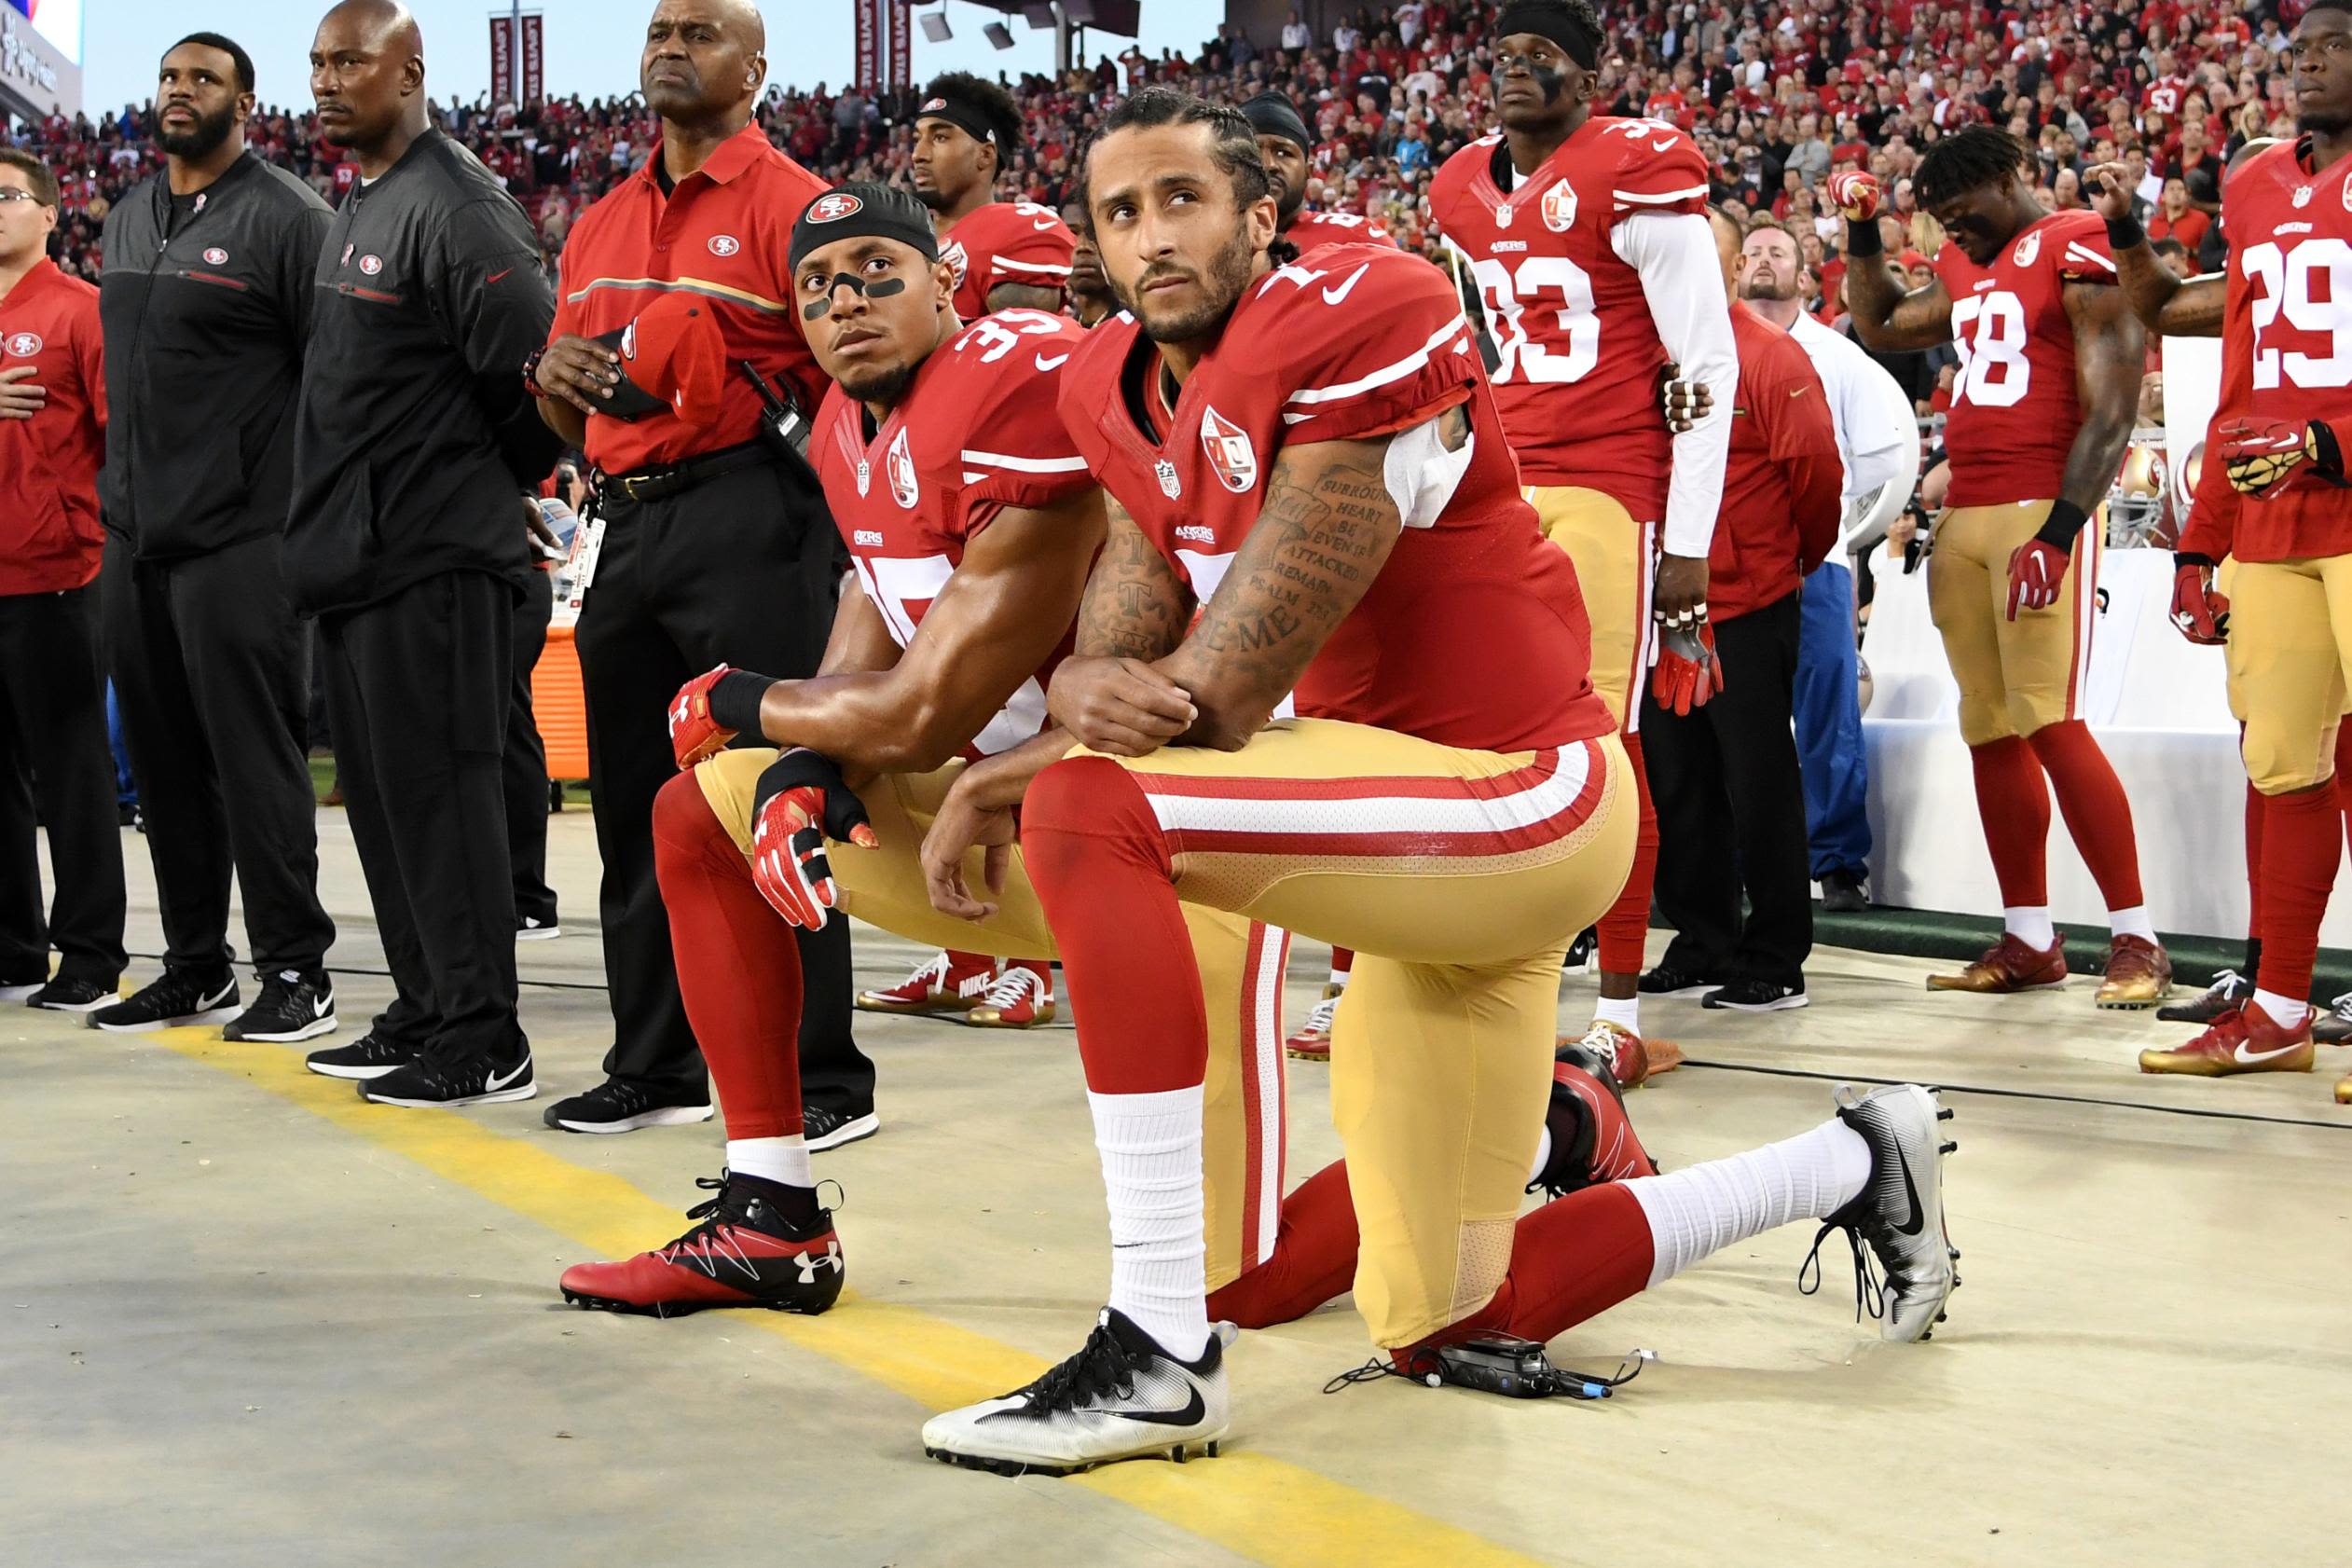 Colin Kaepernick's National Anthem Protest Has Only Fueled NFL's